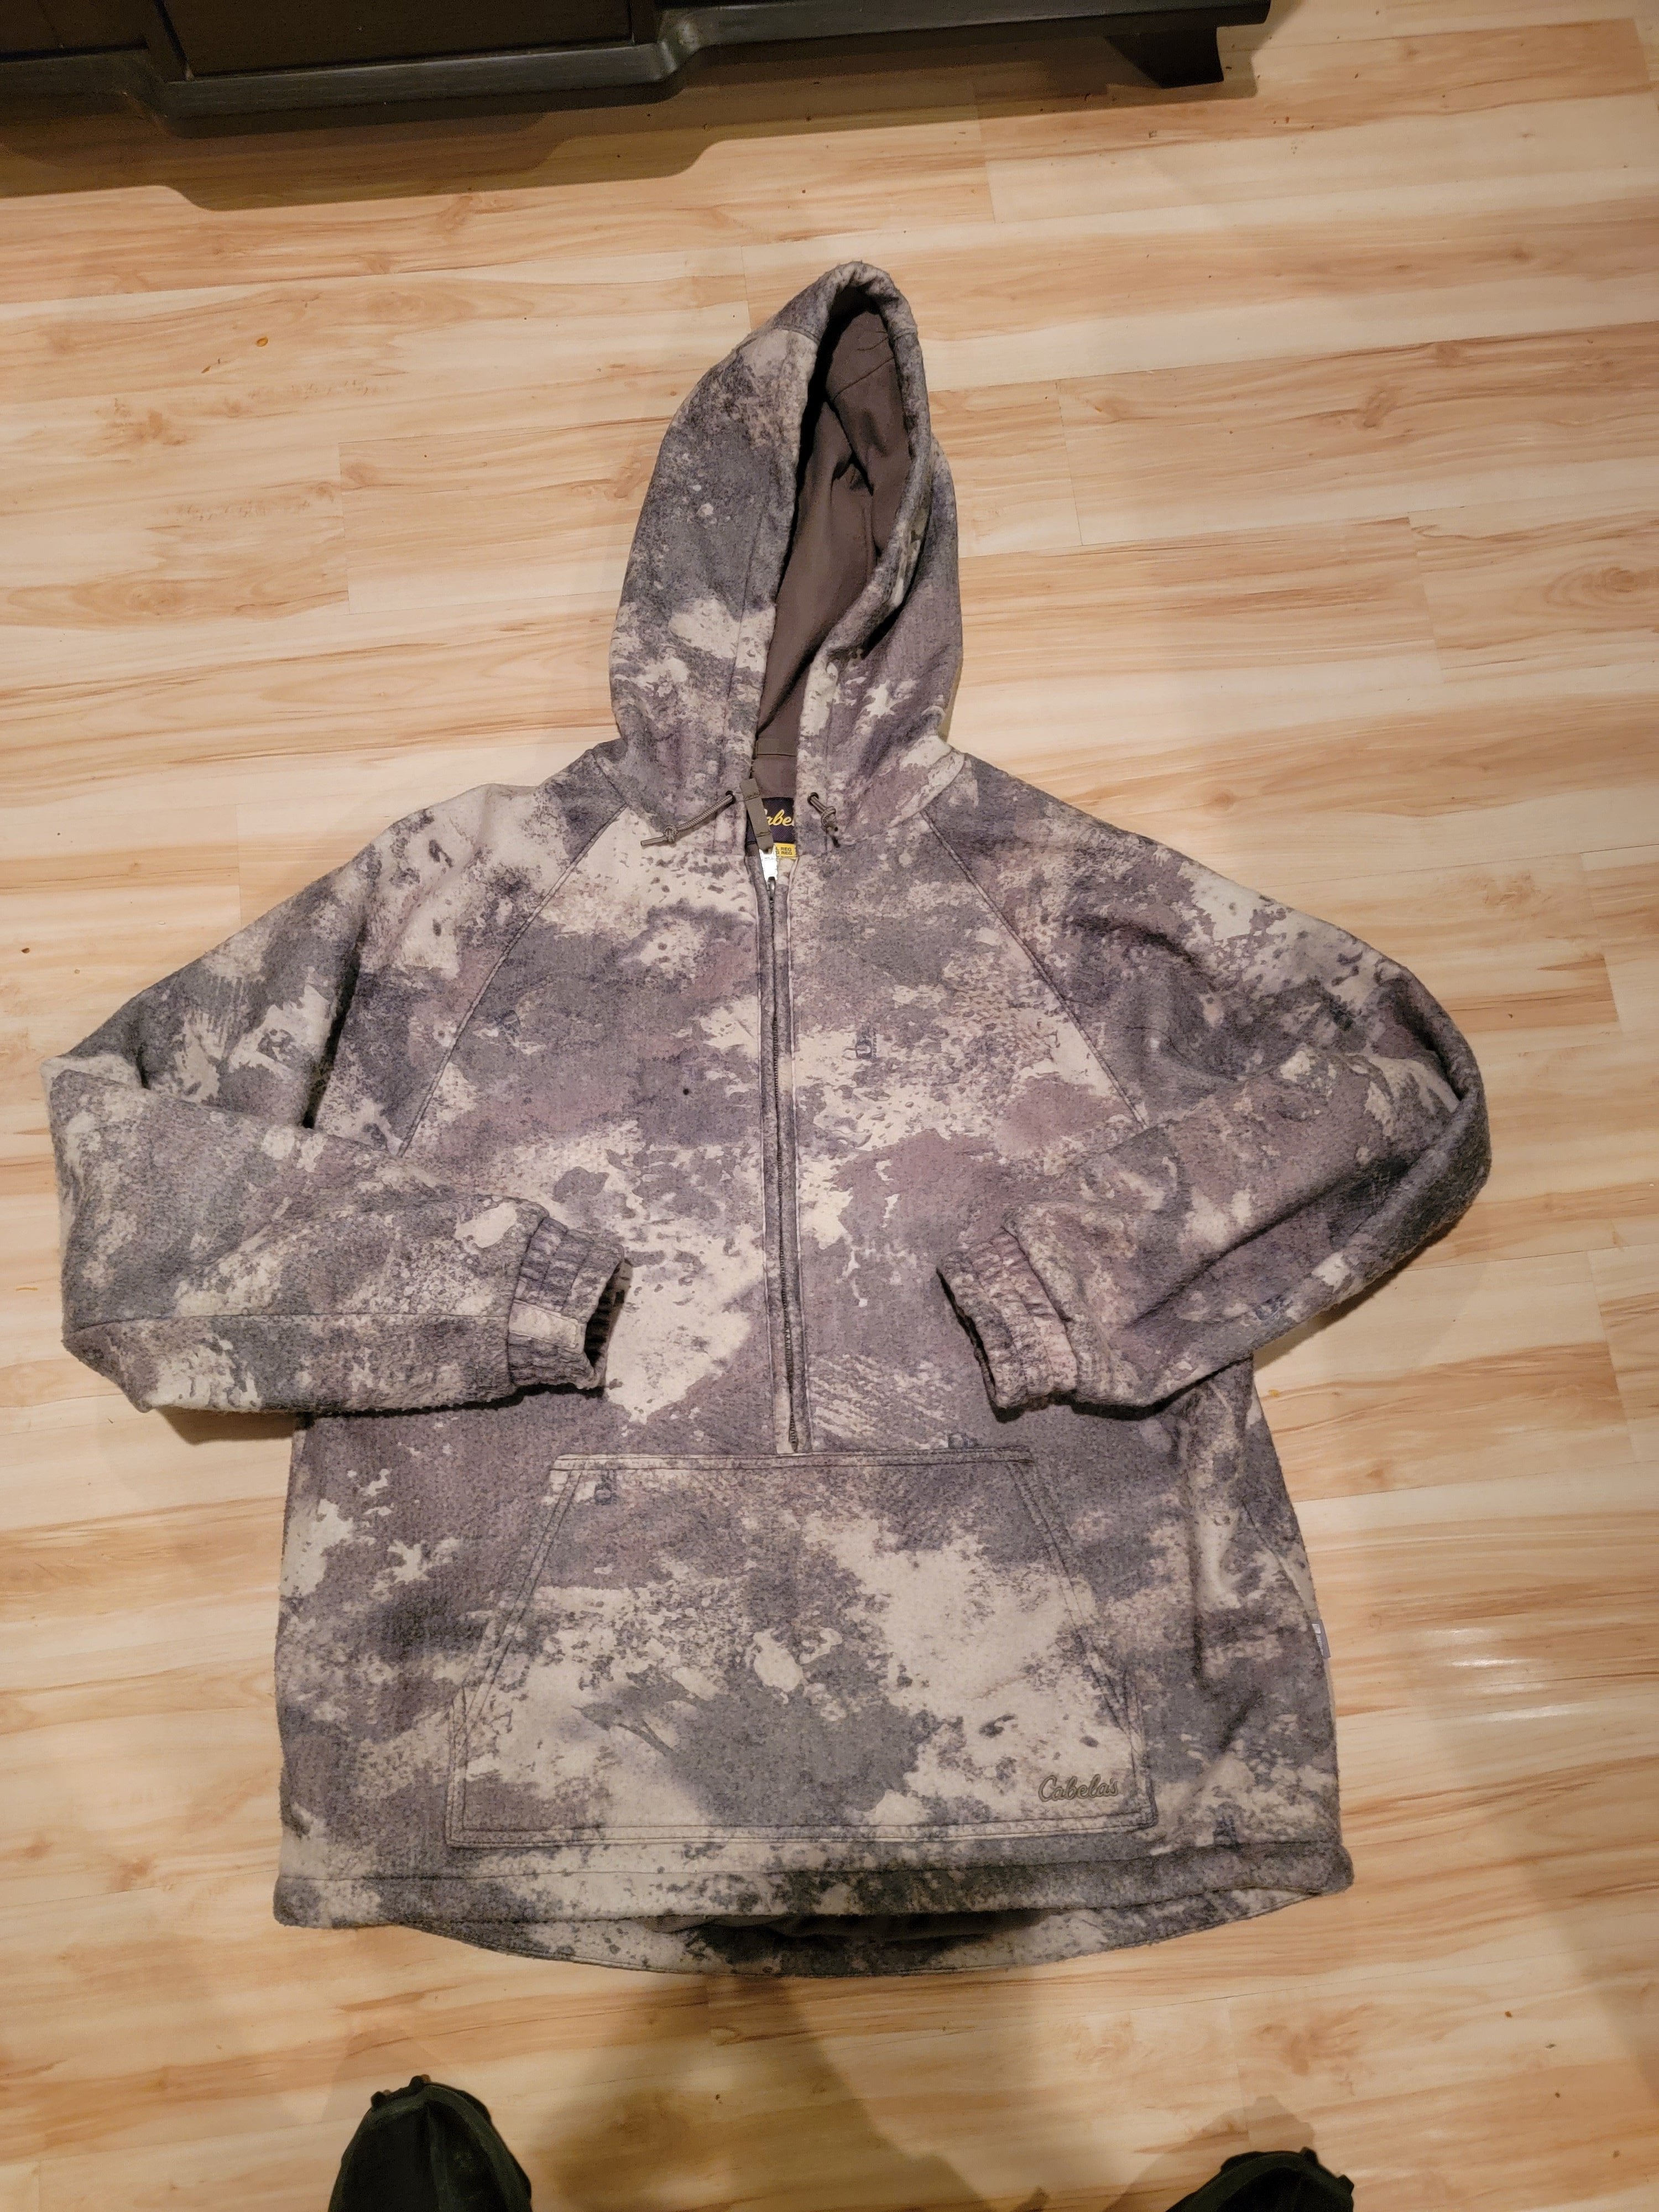 For Sale - Cabelas Wooltimate Jacket and Pants in O2 Octane | Archery ...